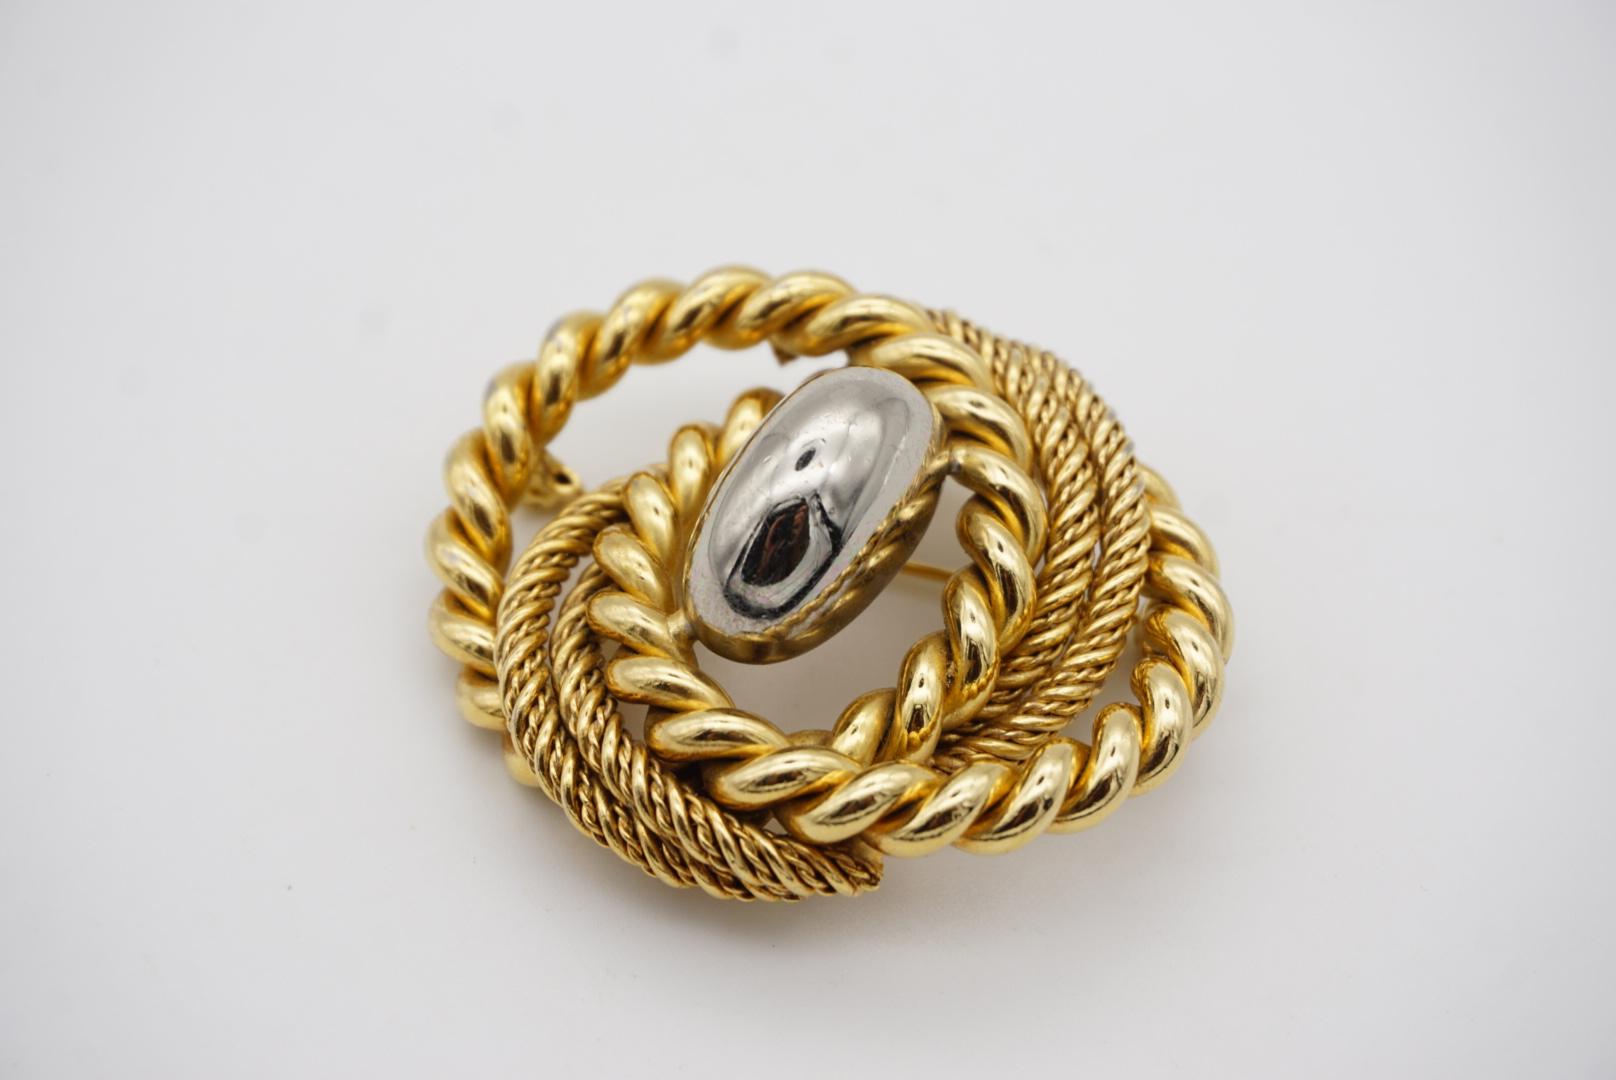 Christian Dior GROSSE 1969 Vintage Large Chunky Swirl Twist Gold Silver Brooch For Sale 2